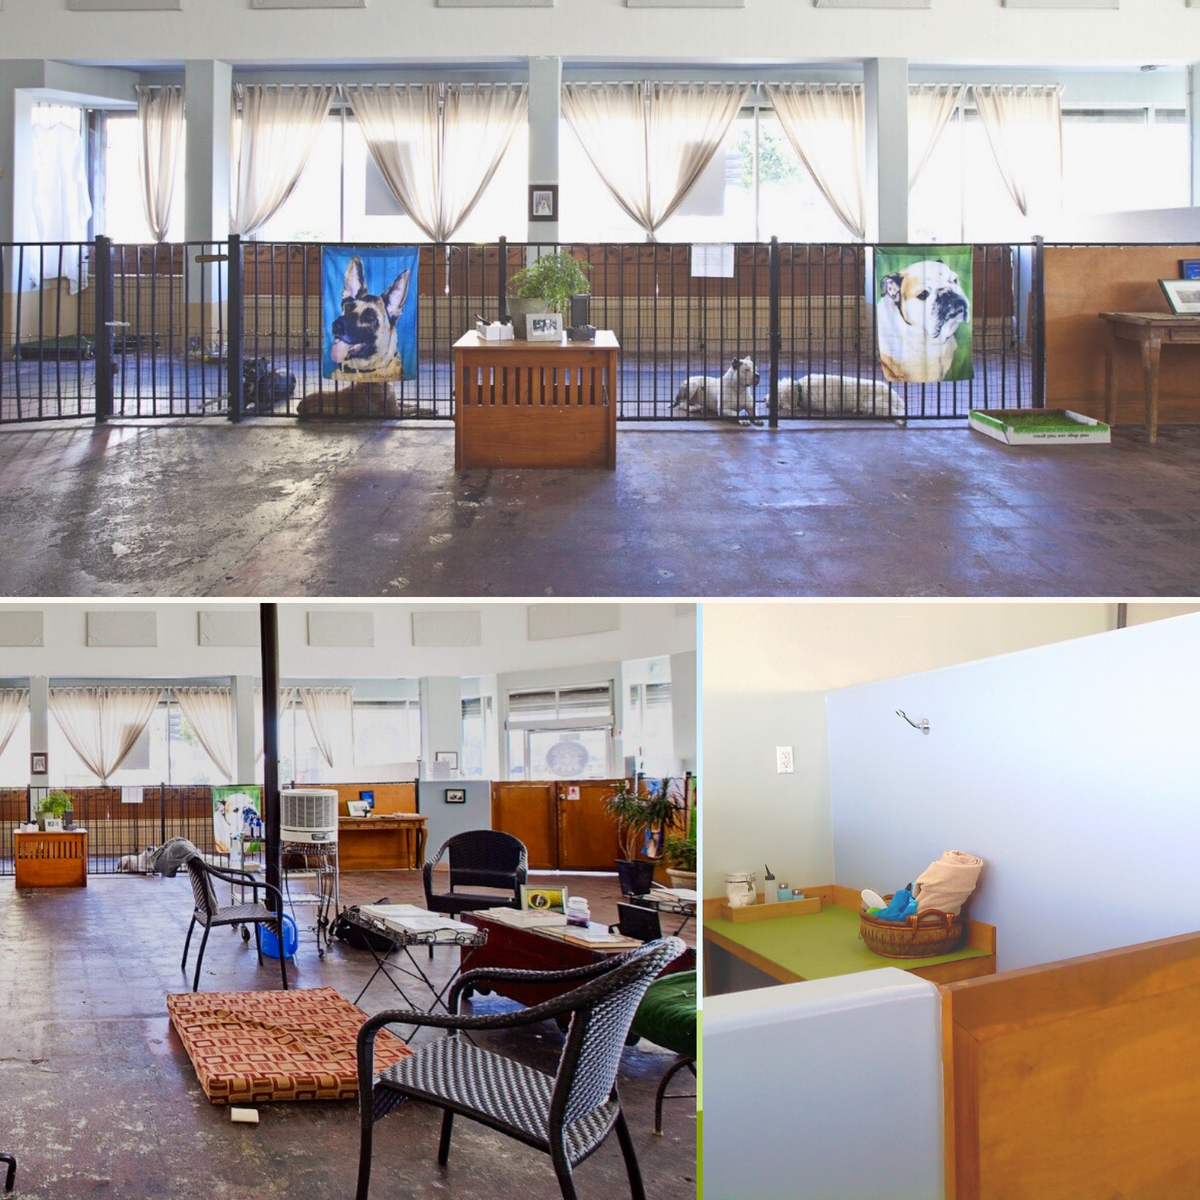 Three interiors pictures of Eco Dog Care LA showing open spaces, fences for safely containing dogs but giving lots of room and lots of natural light. Also shows bath stall with high walls and door to minimize distractions,